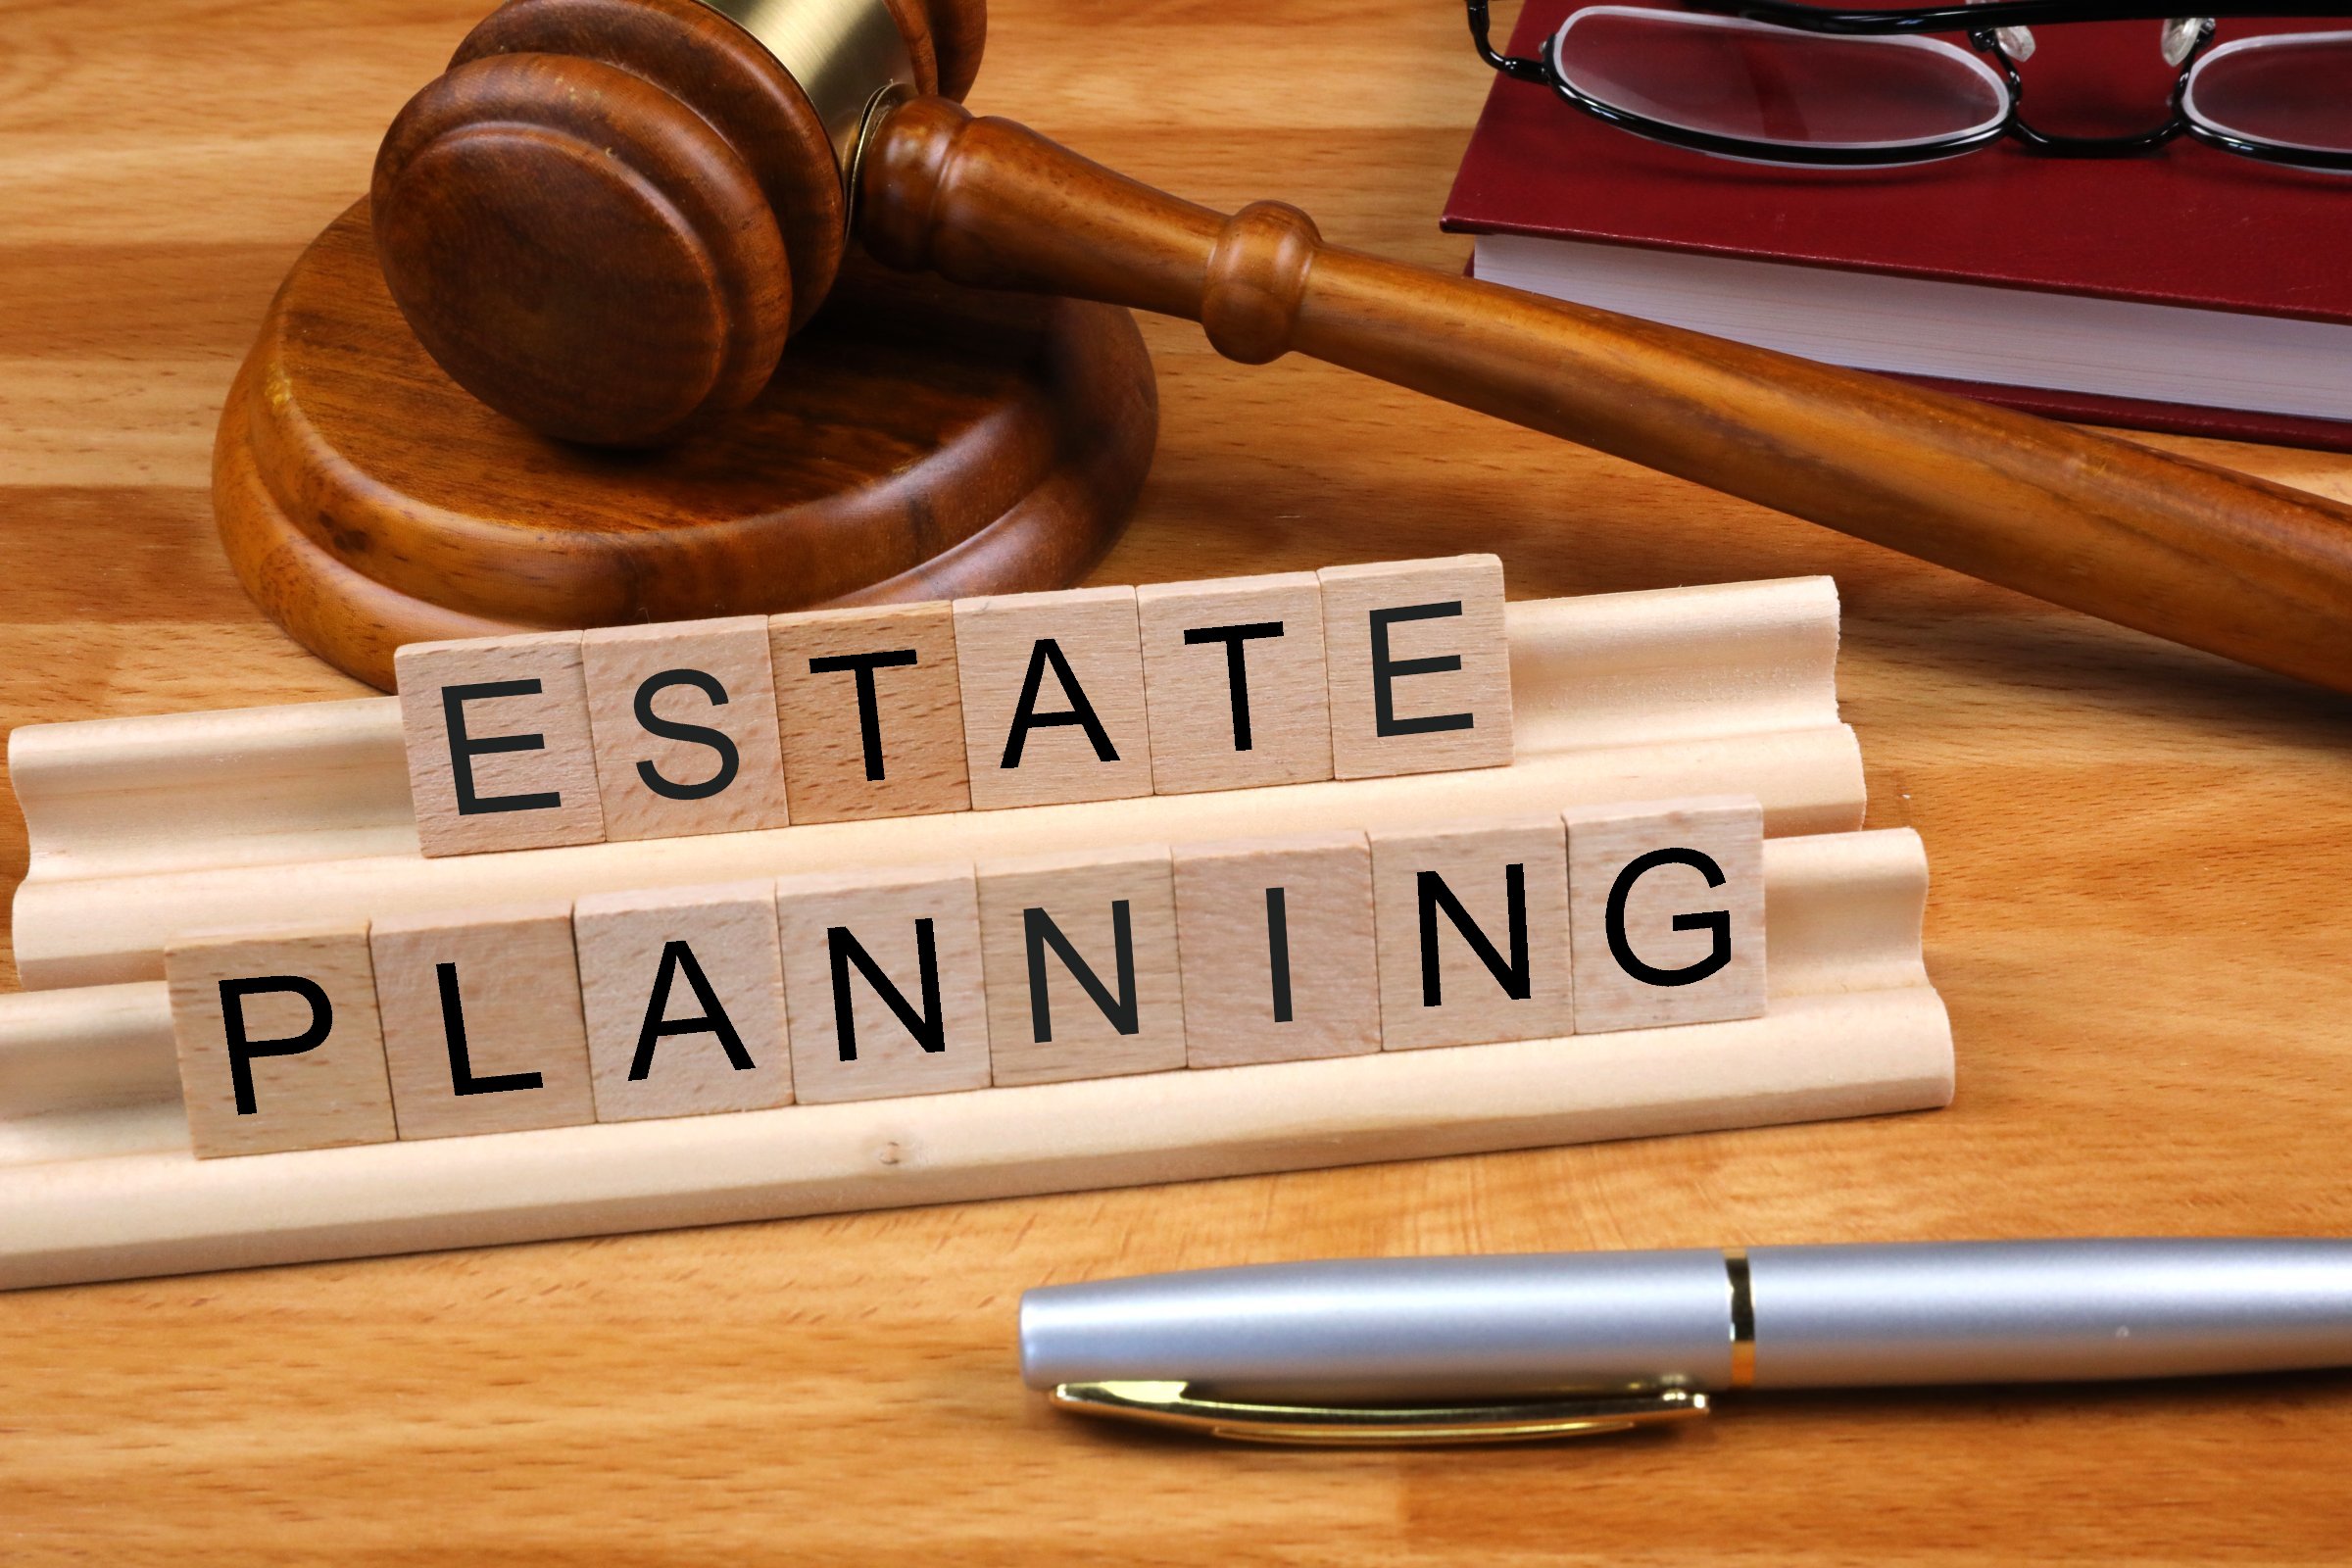 Pen and gavel next to a sign reading "Estate Planning" (Photo credit to Nick Youngson)